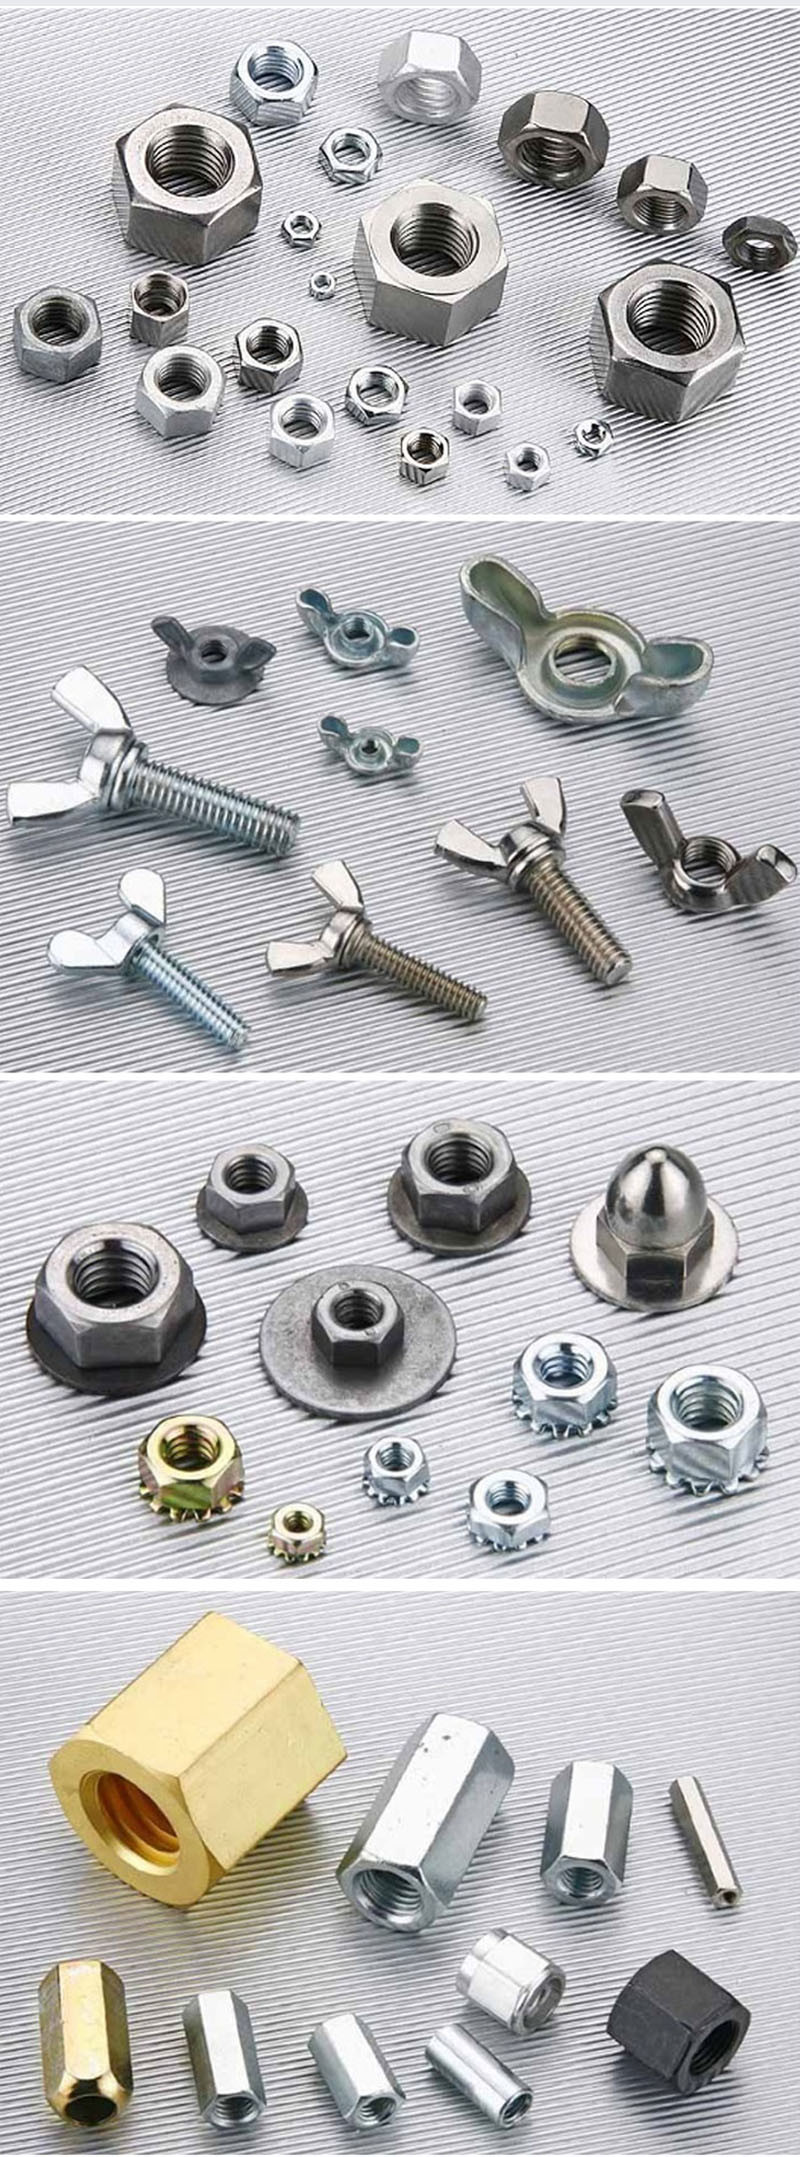 2016 Wholesale Stailess Steel or Steel Bolt and Nut Manufacturer